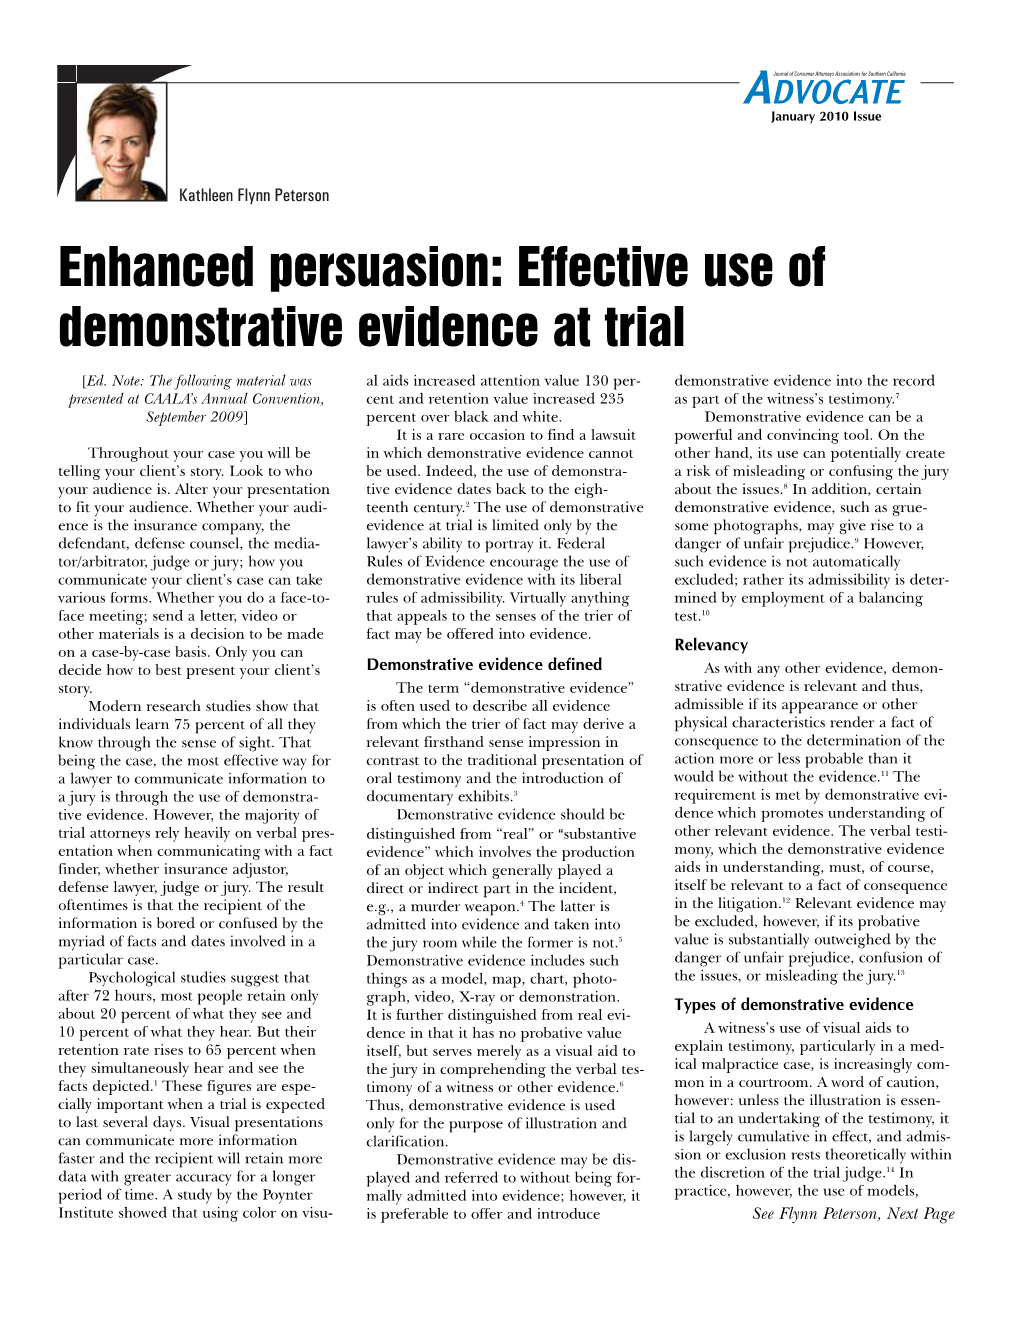 Enhanced Persuasion: Effective Use of Demonstrative Evidence at Trial